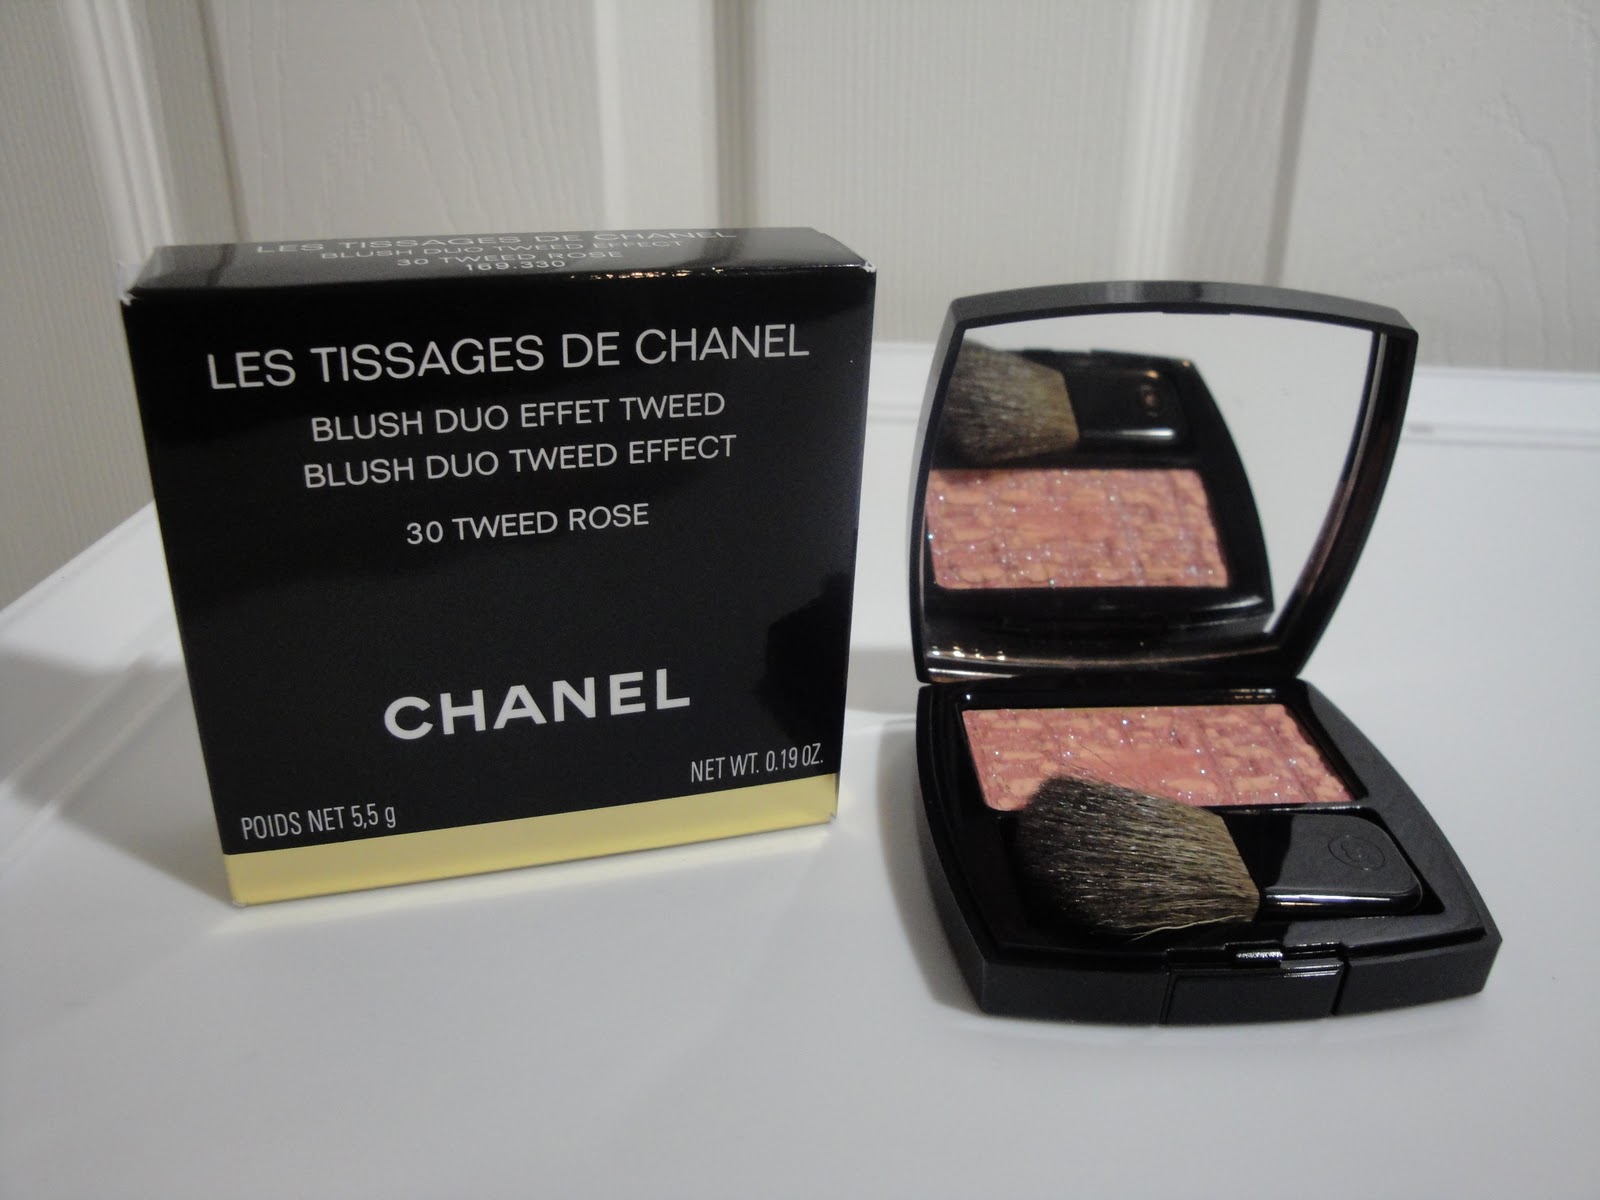 Jayded Dreaming Beauty Blog : CHANEL LES TISSAGES DE CHANEL: 30 Tweed